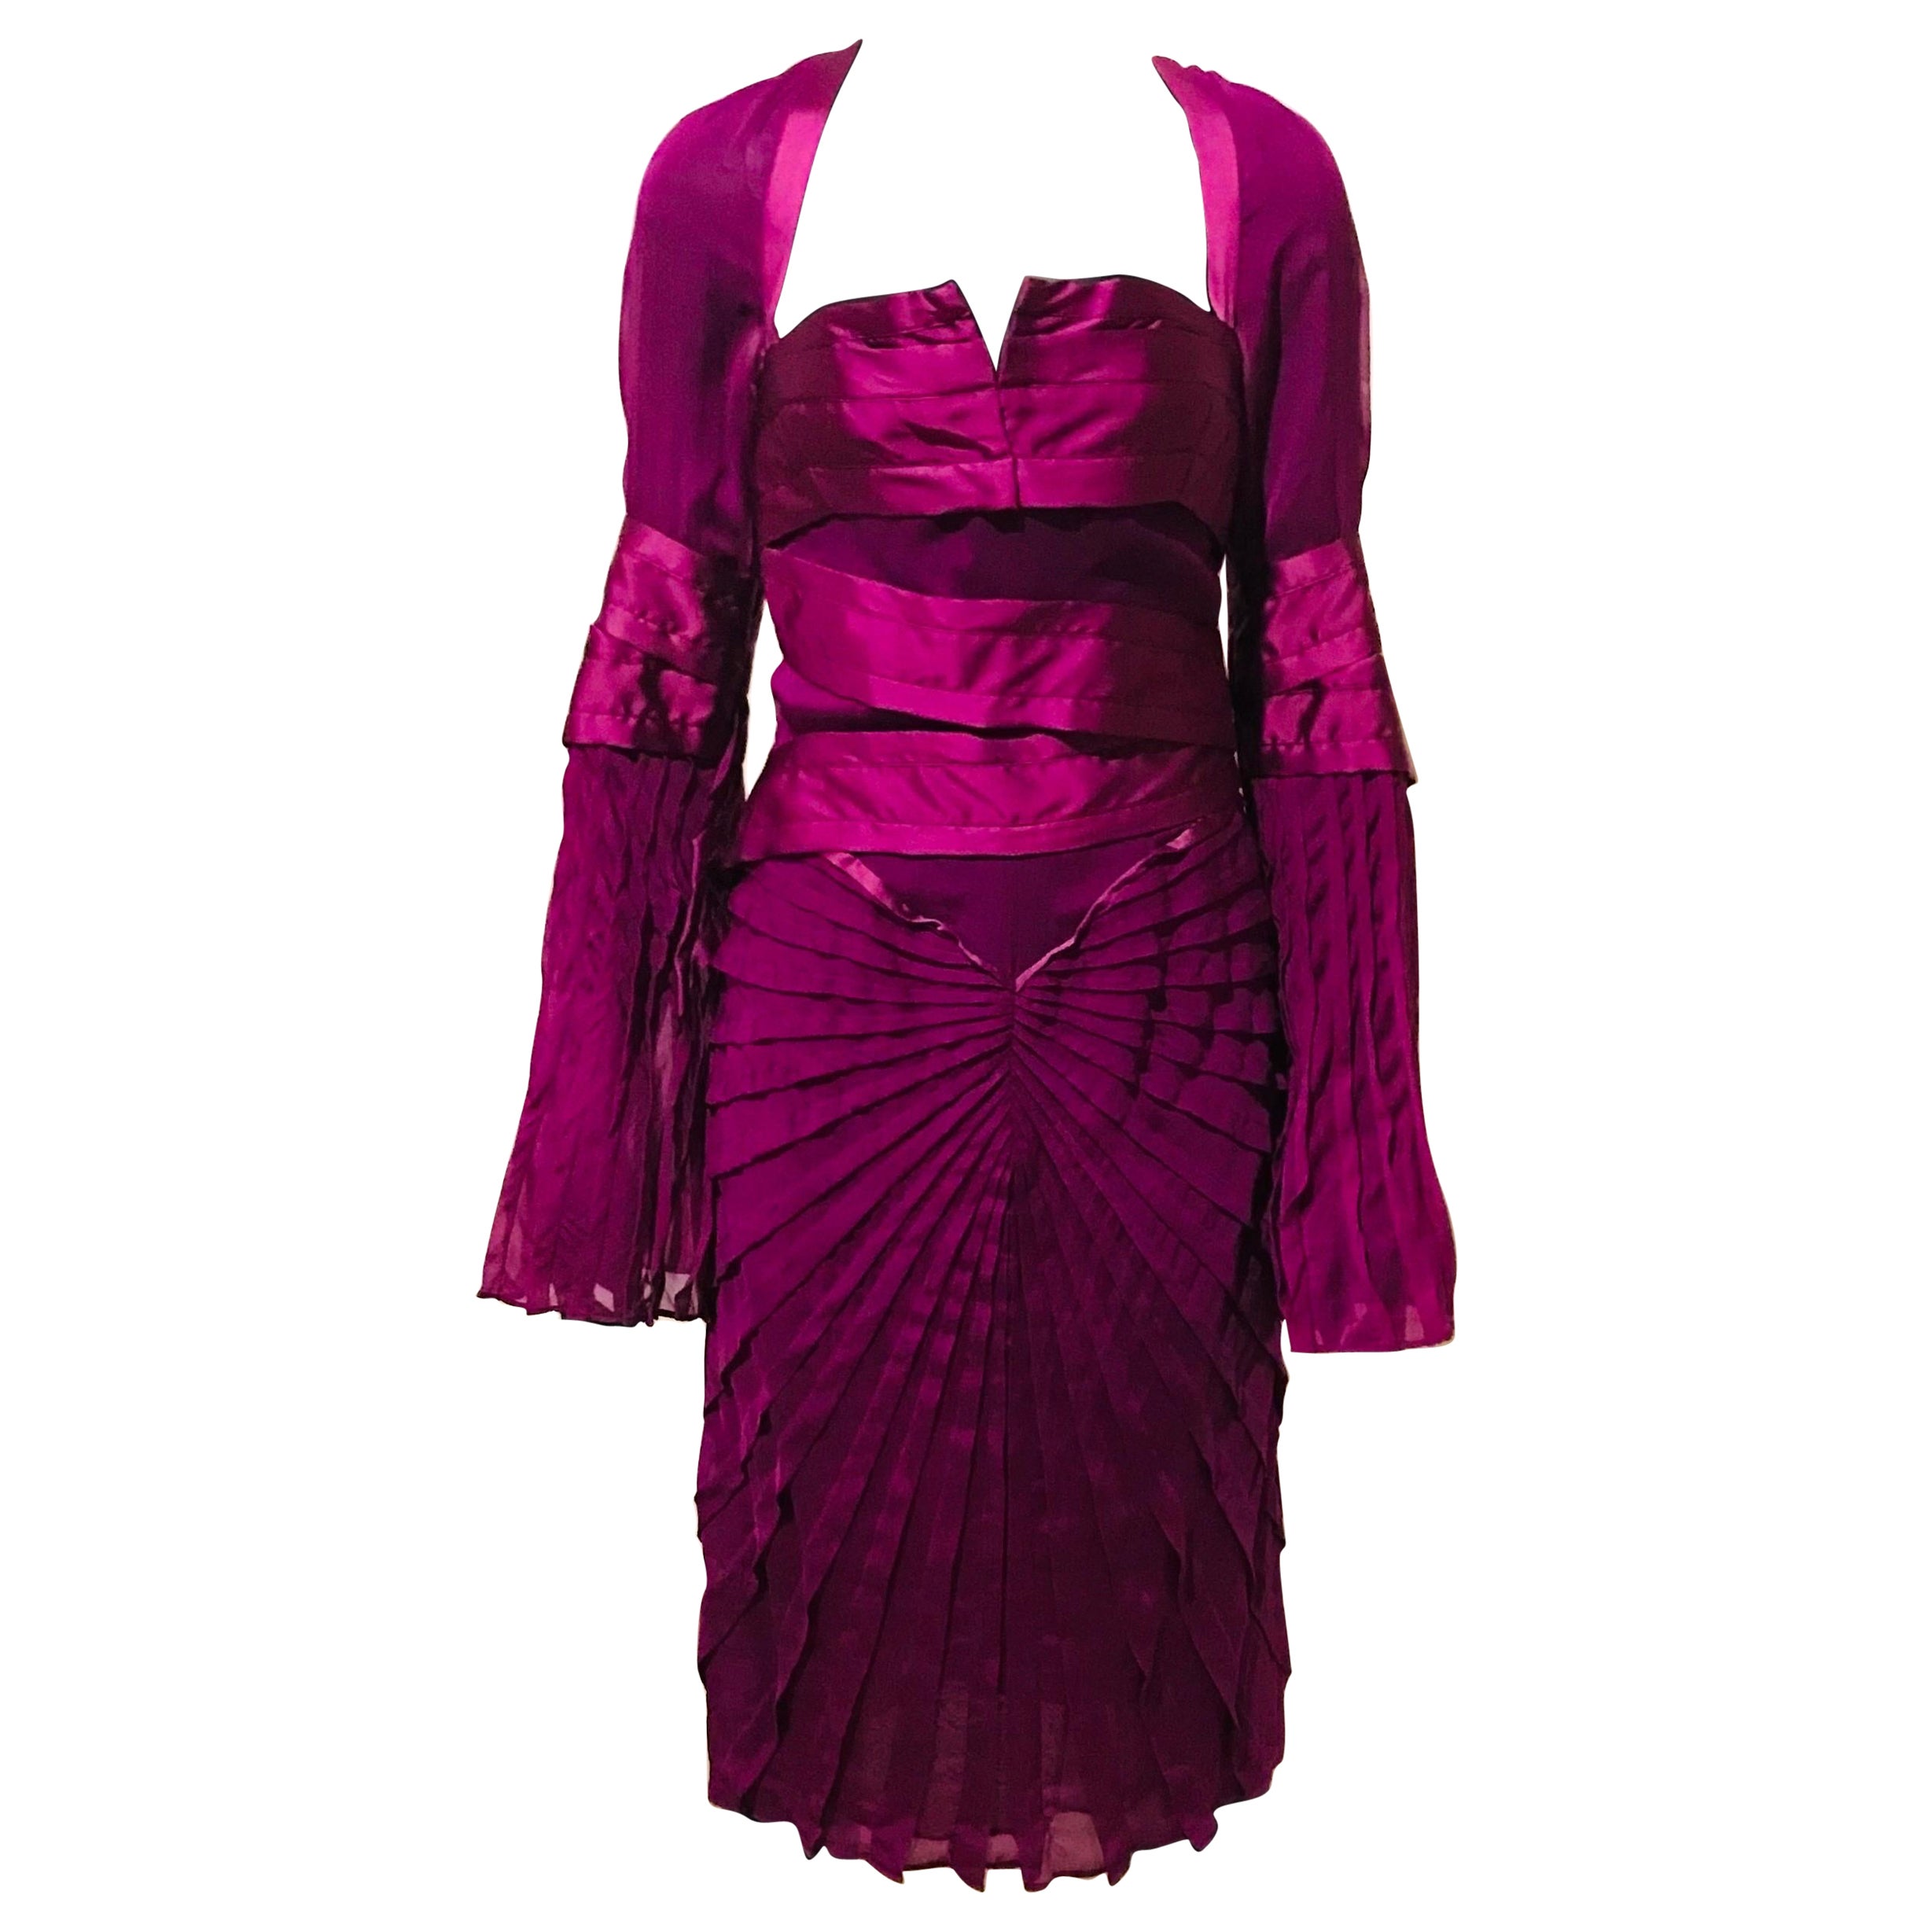 Final collection F/W look #27 Tom Ford for GUCCI magenta silk dress